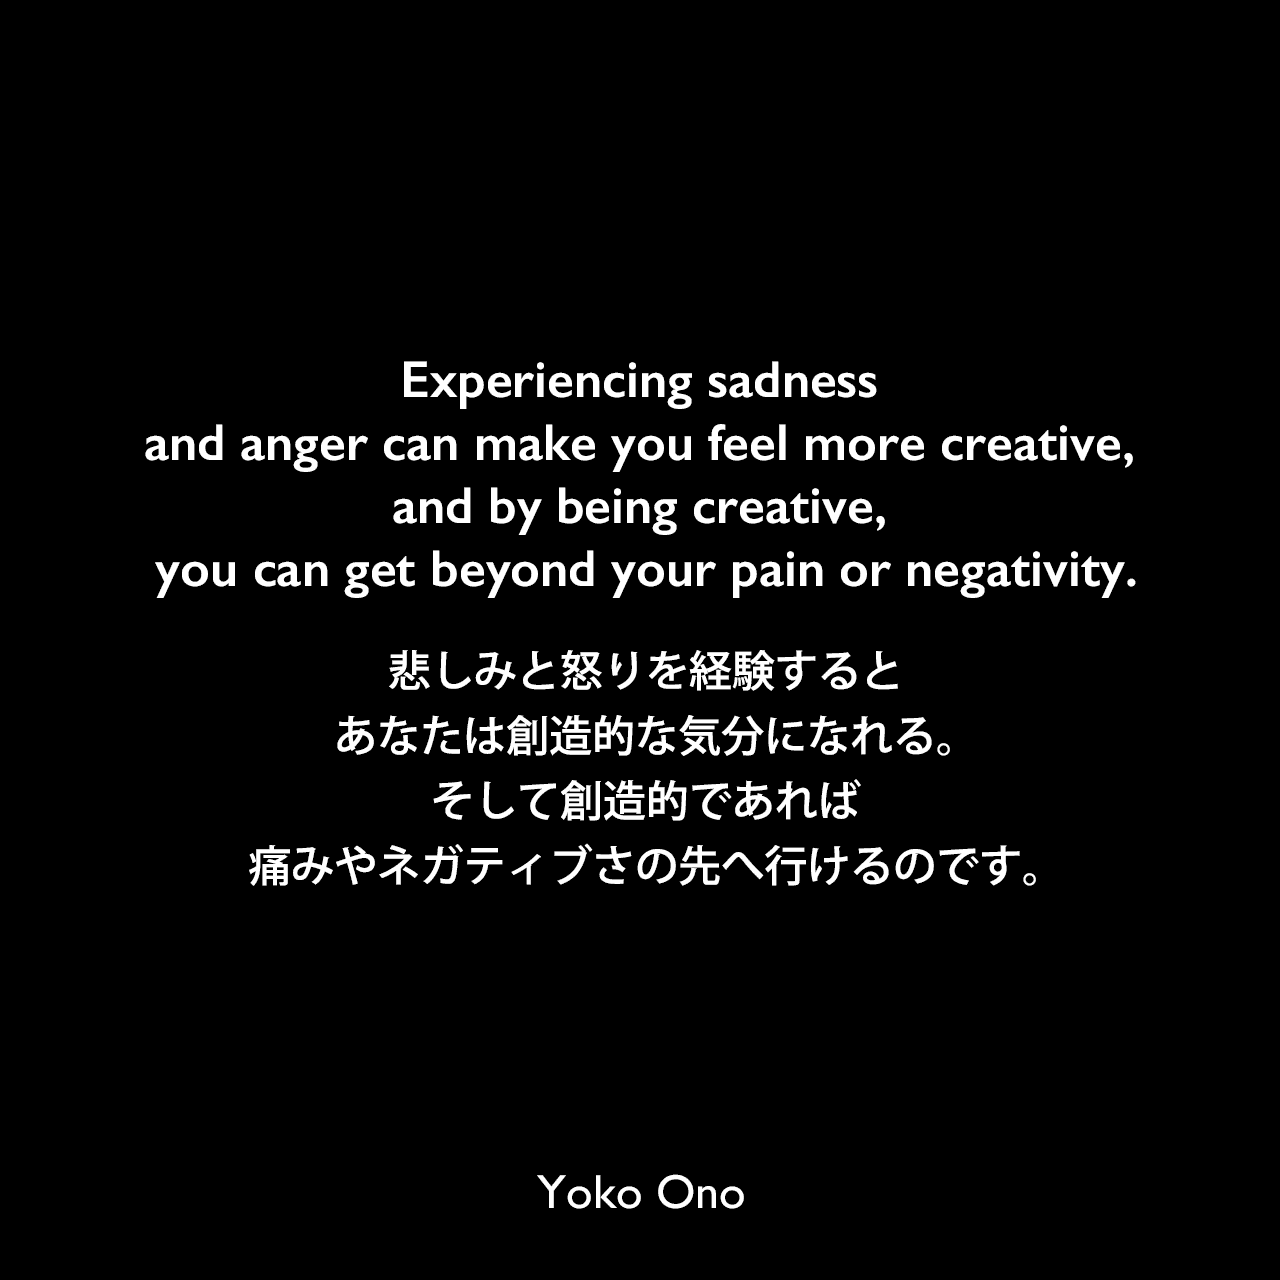 Experiencing sadness and anger can make you feel more creative, and by being creative, you can get beyond your pain or negativity.悲しみと怒りを経験するとあなたは創造的な気分になれる。そして創造的であれば、痛みやネガティブさの先へ行けるのです。Yoko Ono